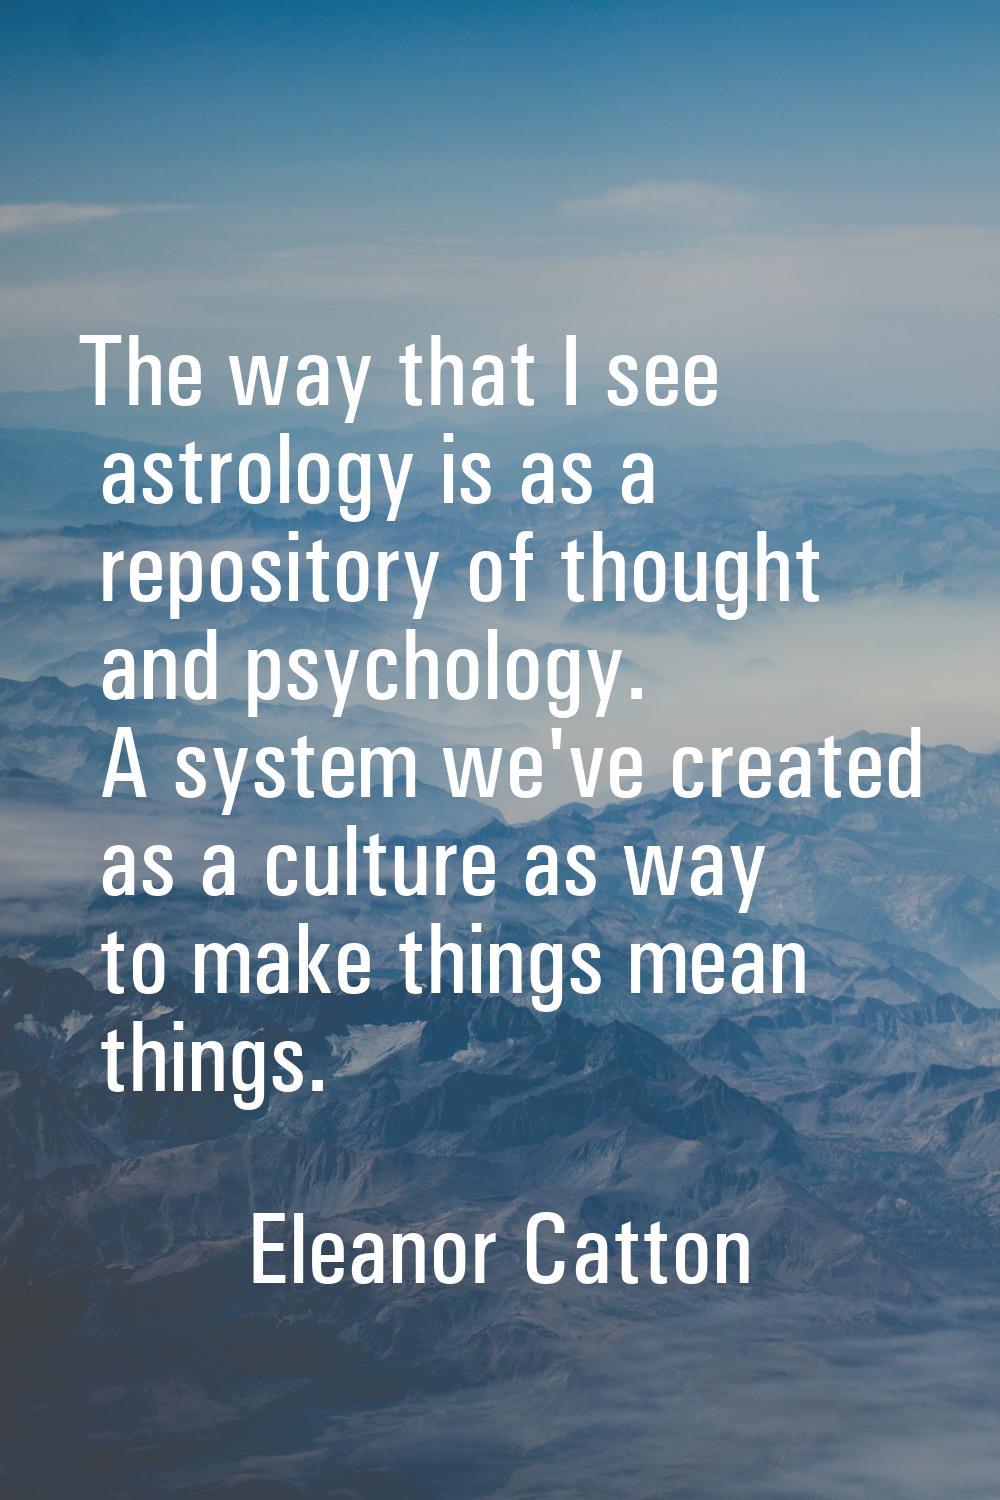 The way that I see astrology is as a repository of thought and psychology. A system we've created a